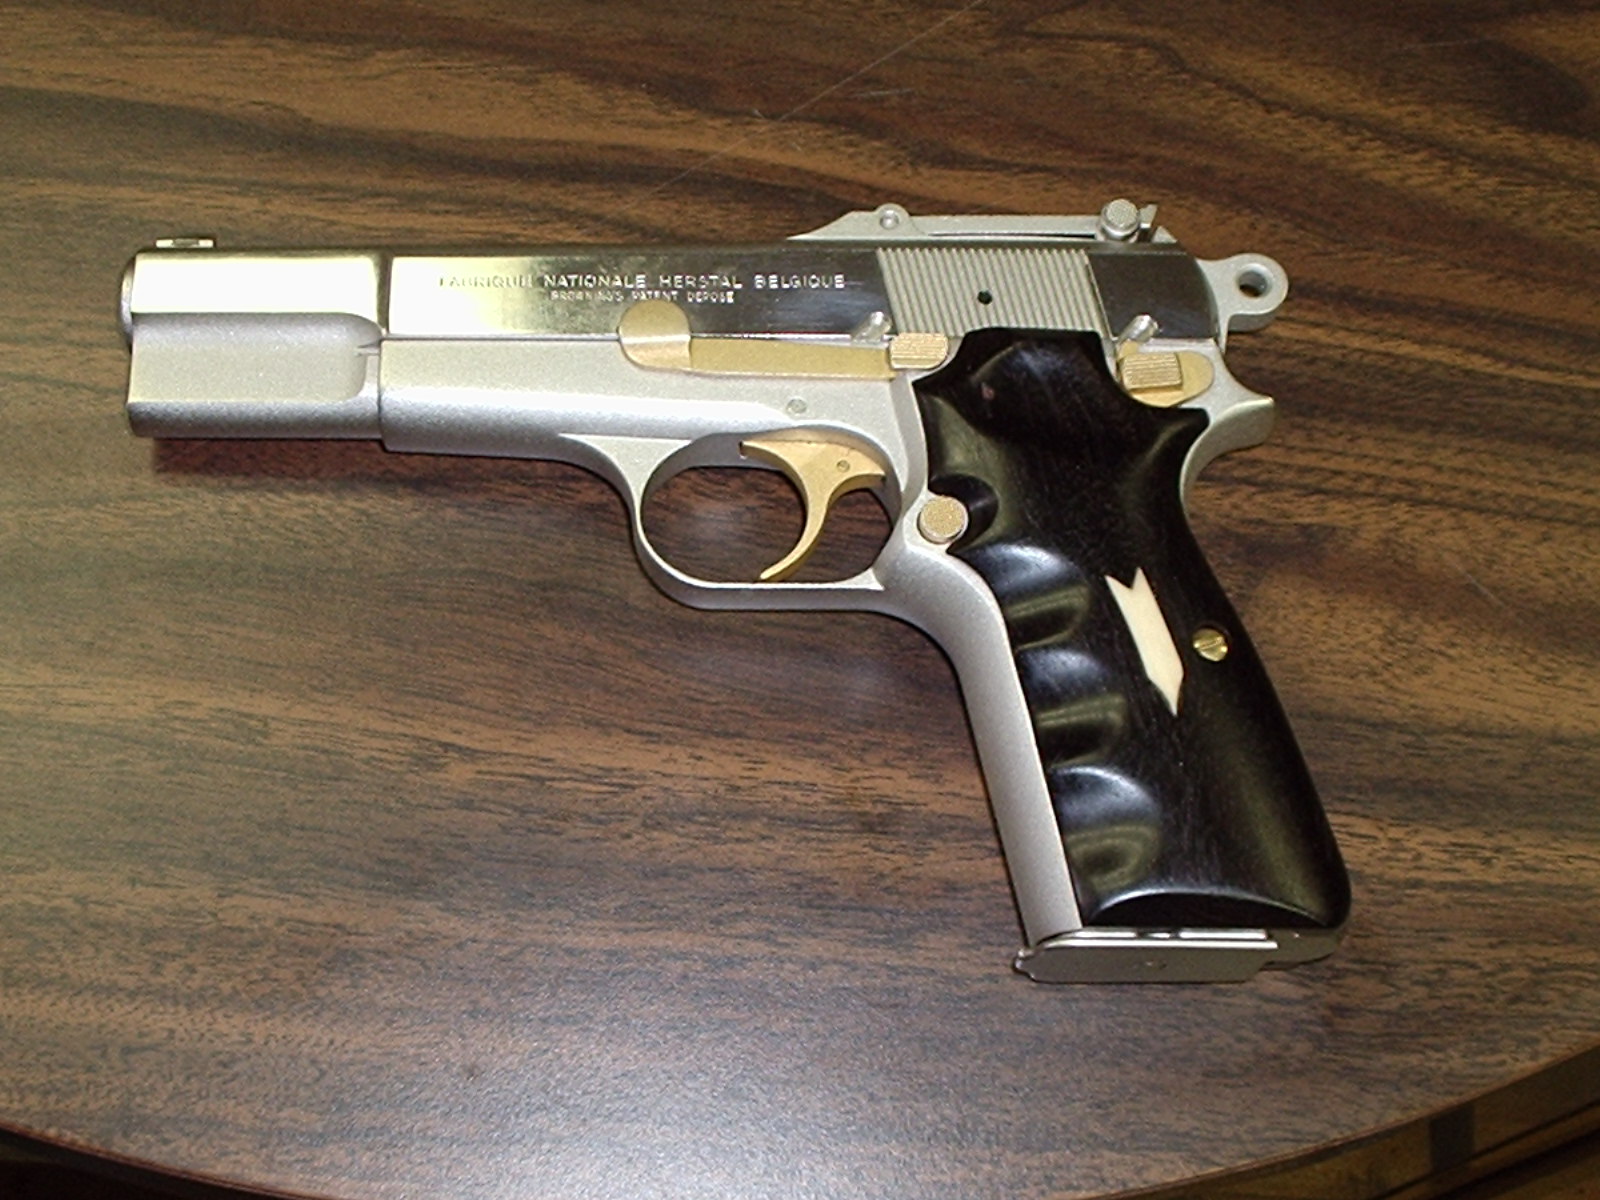 c9 luger 9mm high point price